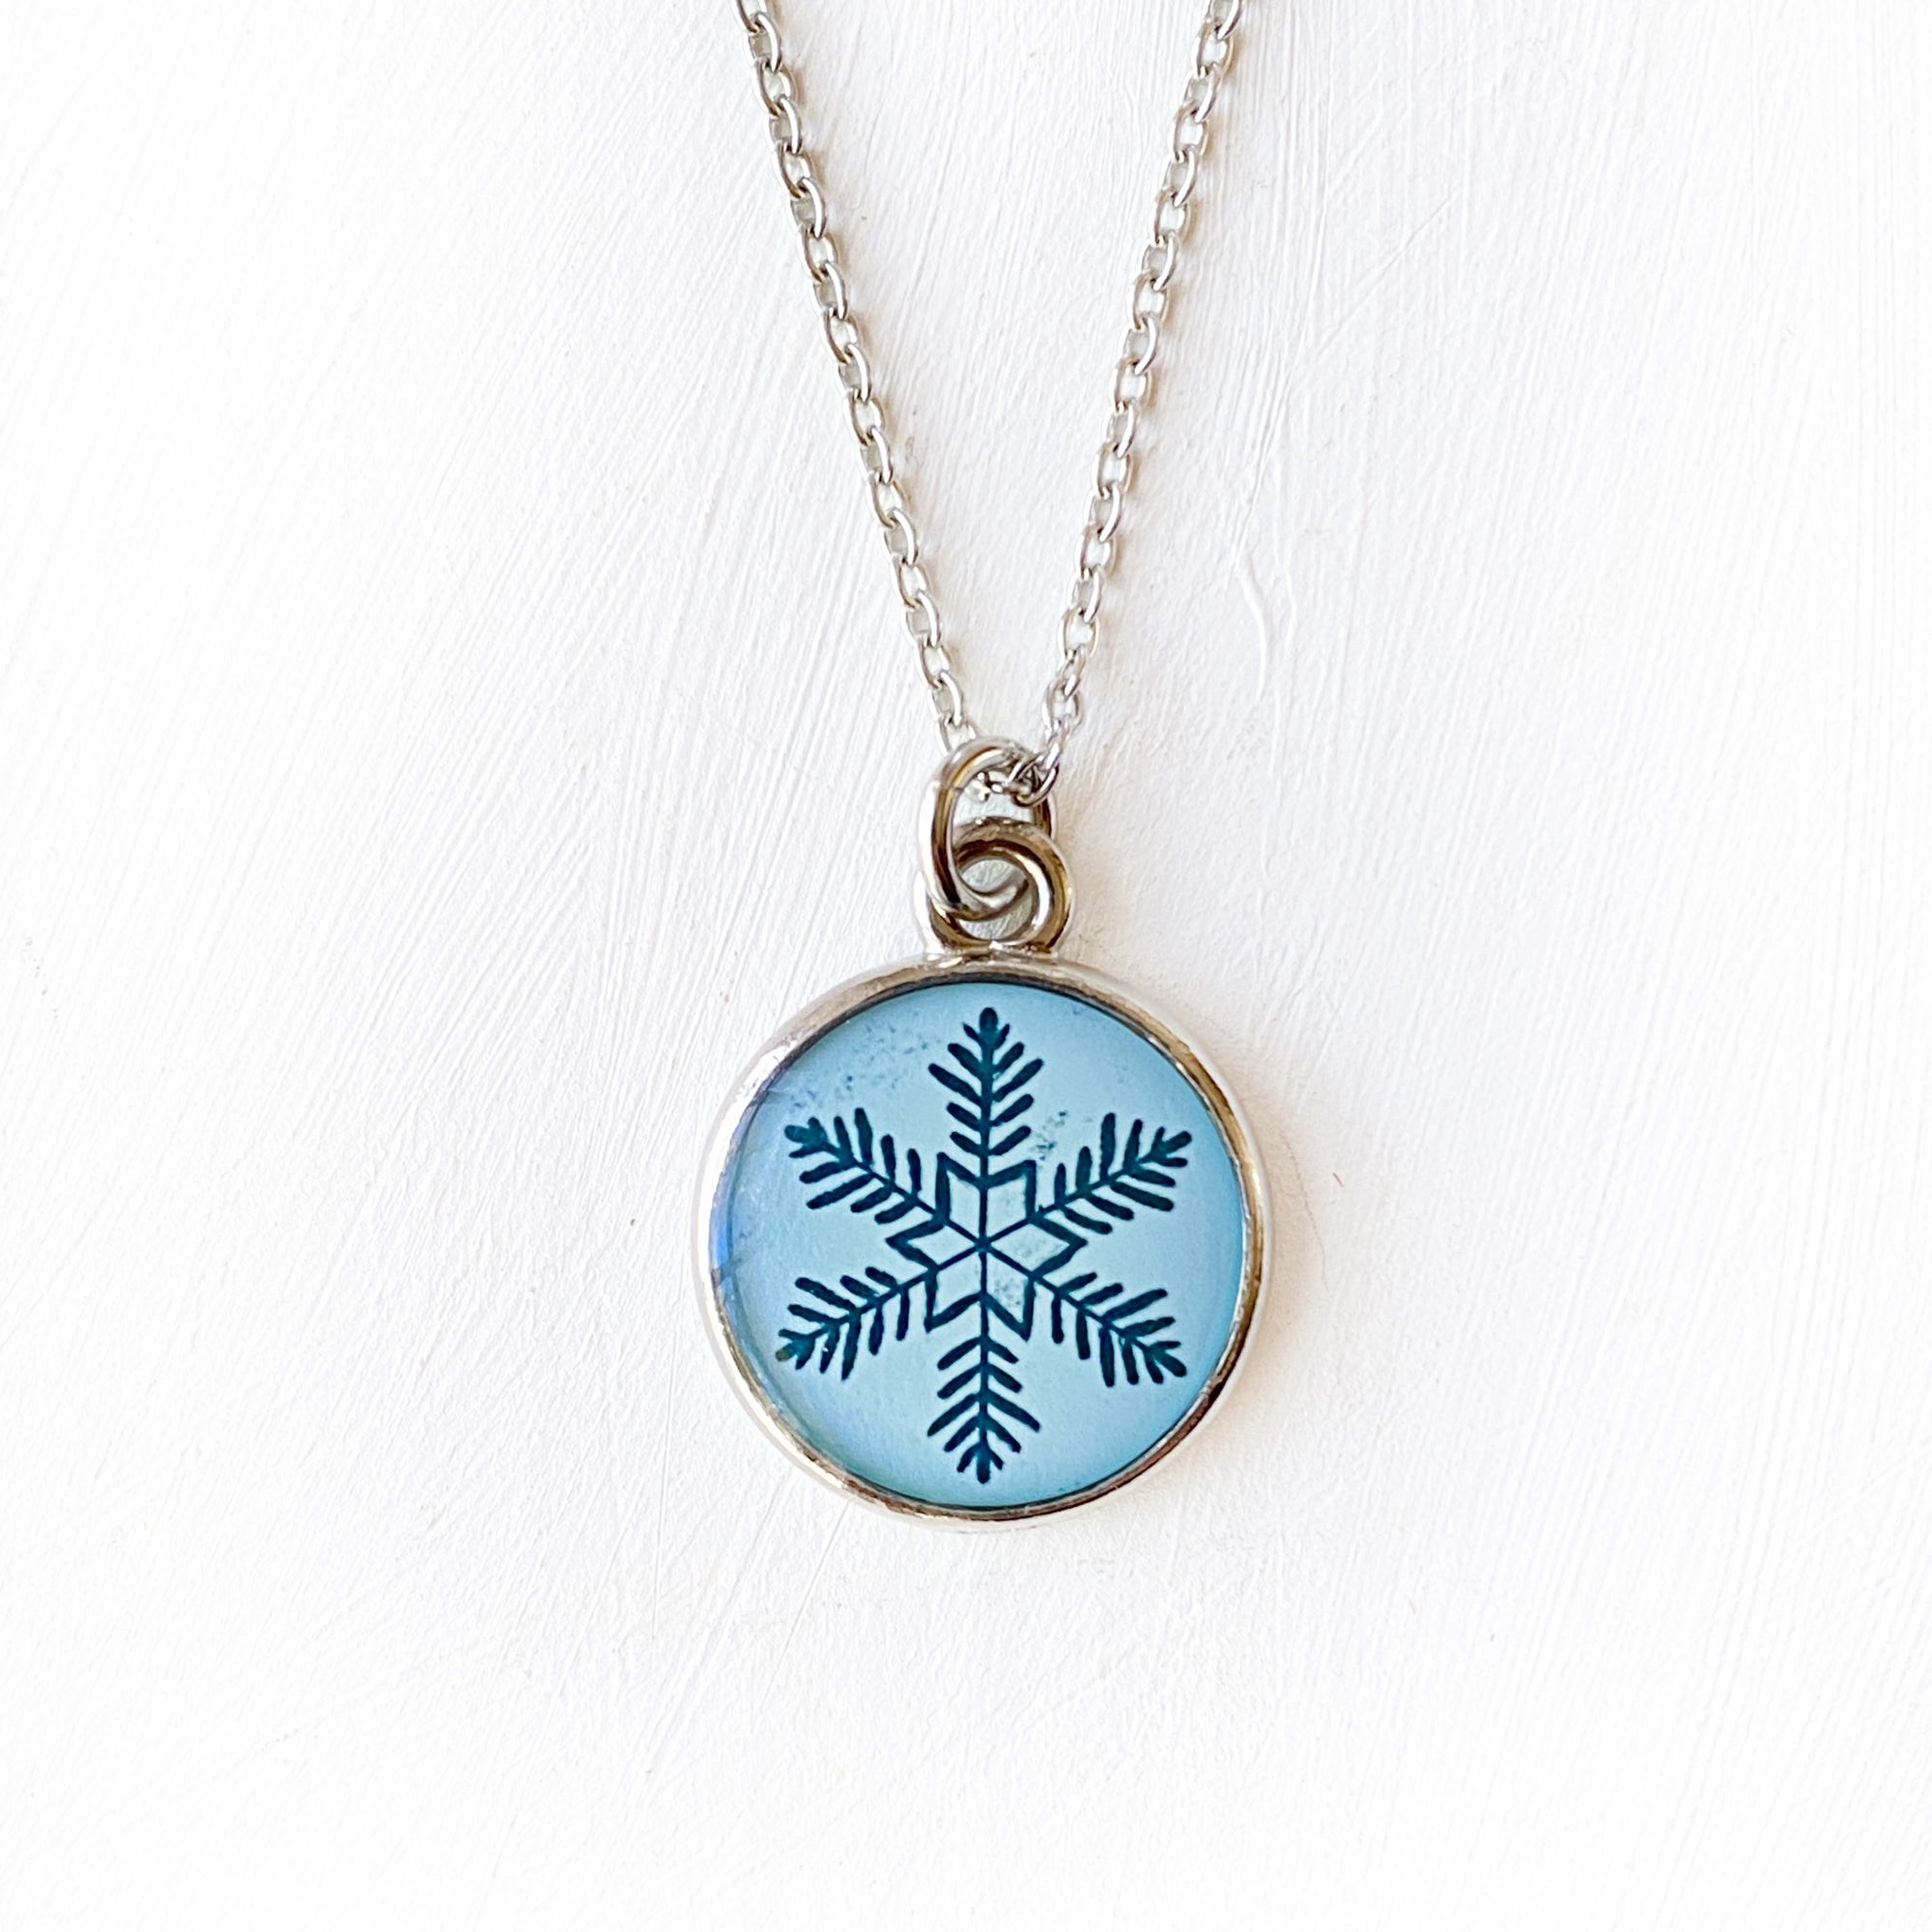 a necklace with a snowflake design on it